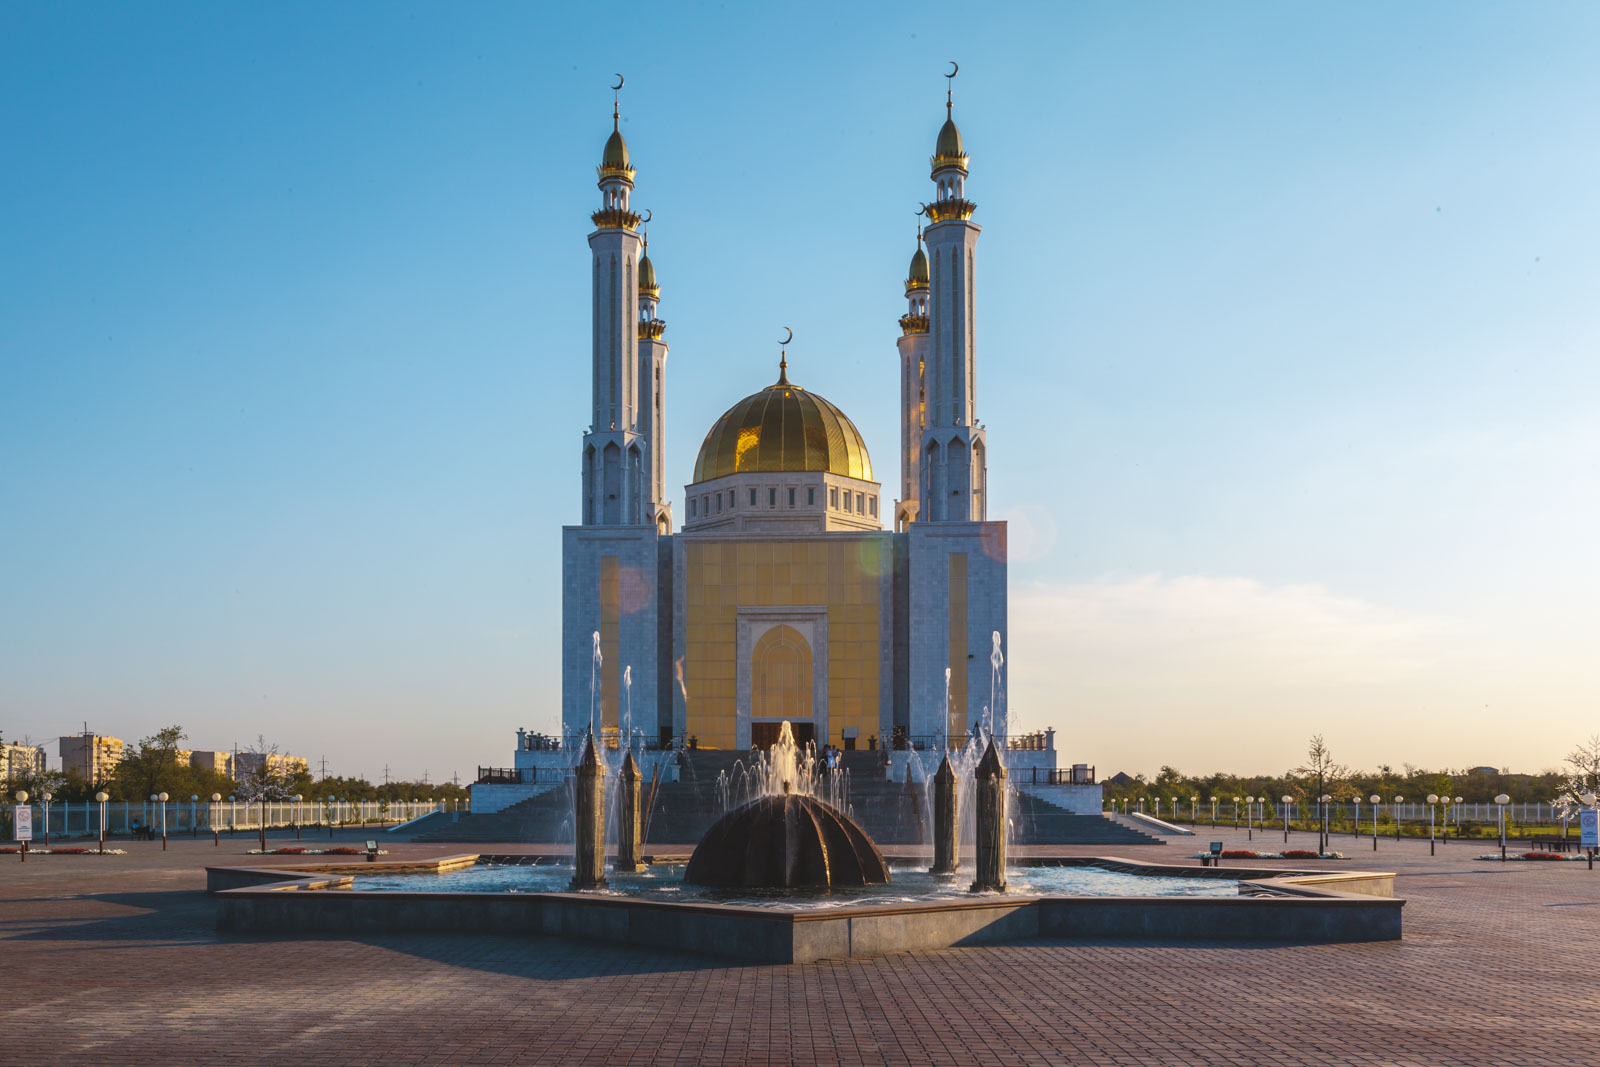 Central Asia is a great Budget travel destination